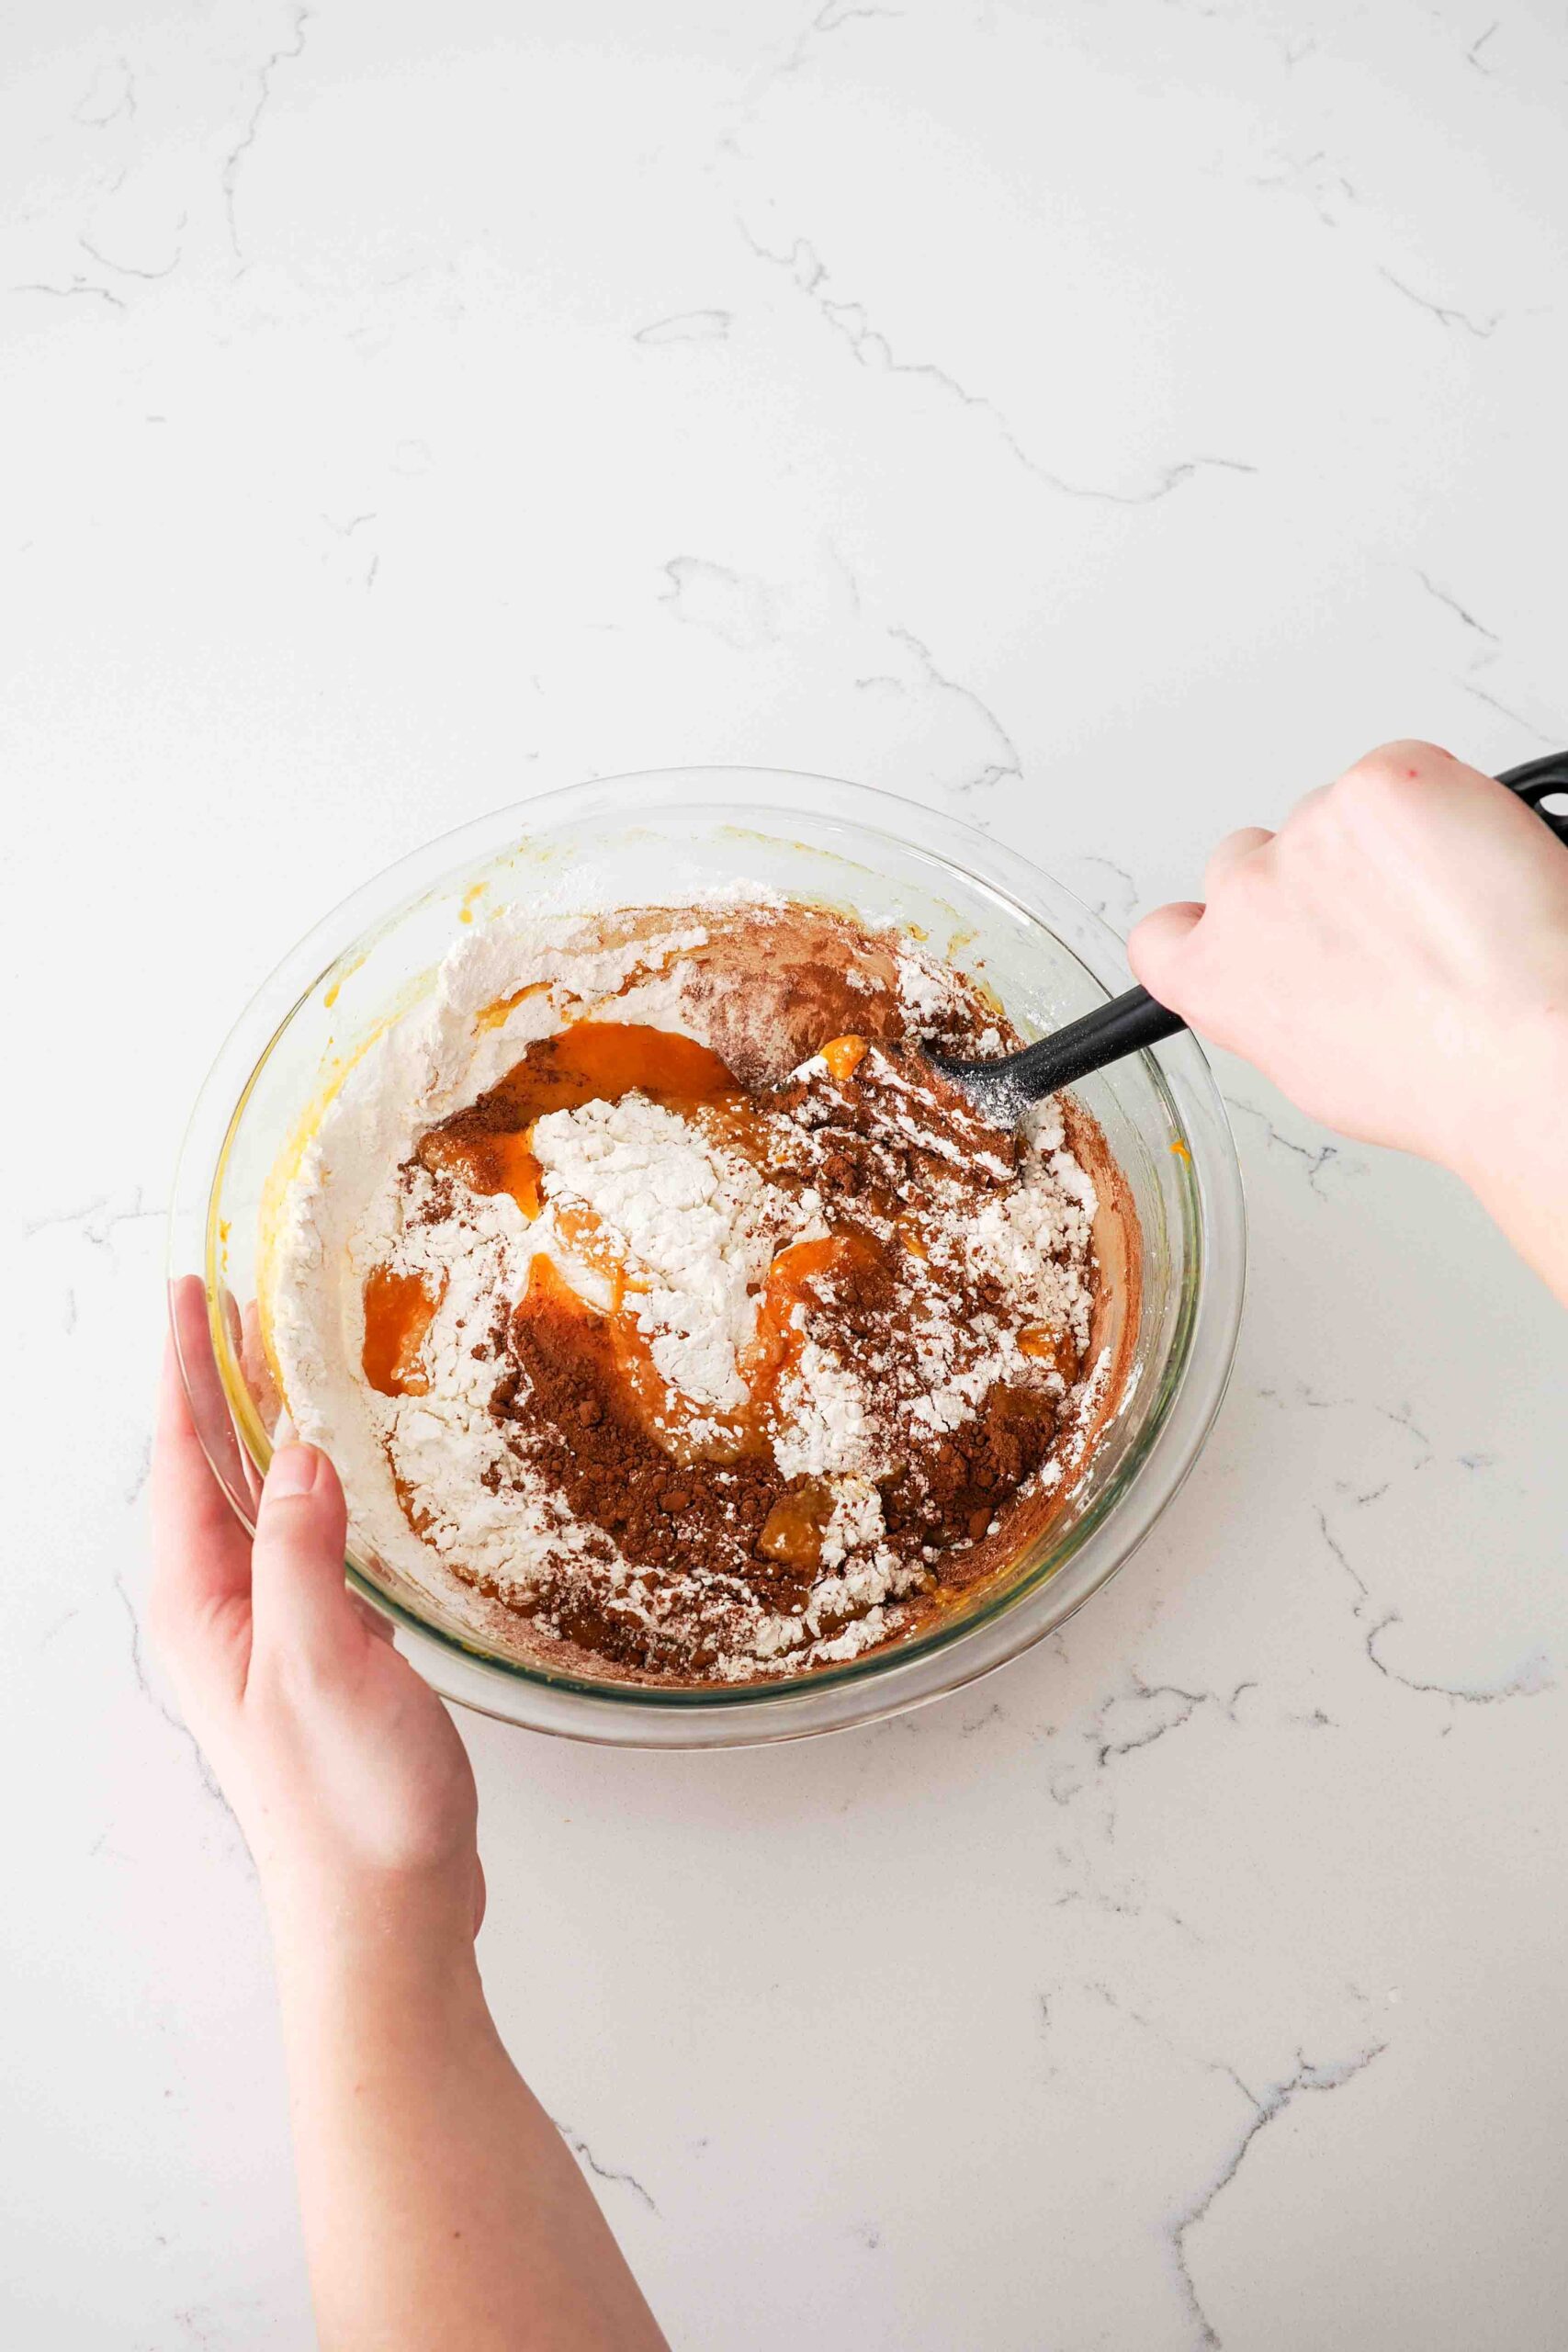 Two hands use a spatula to stir in the dry ingredients into a wet pumpkin batter.